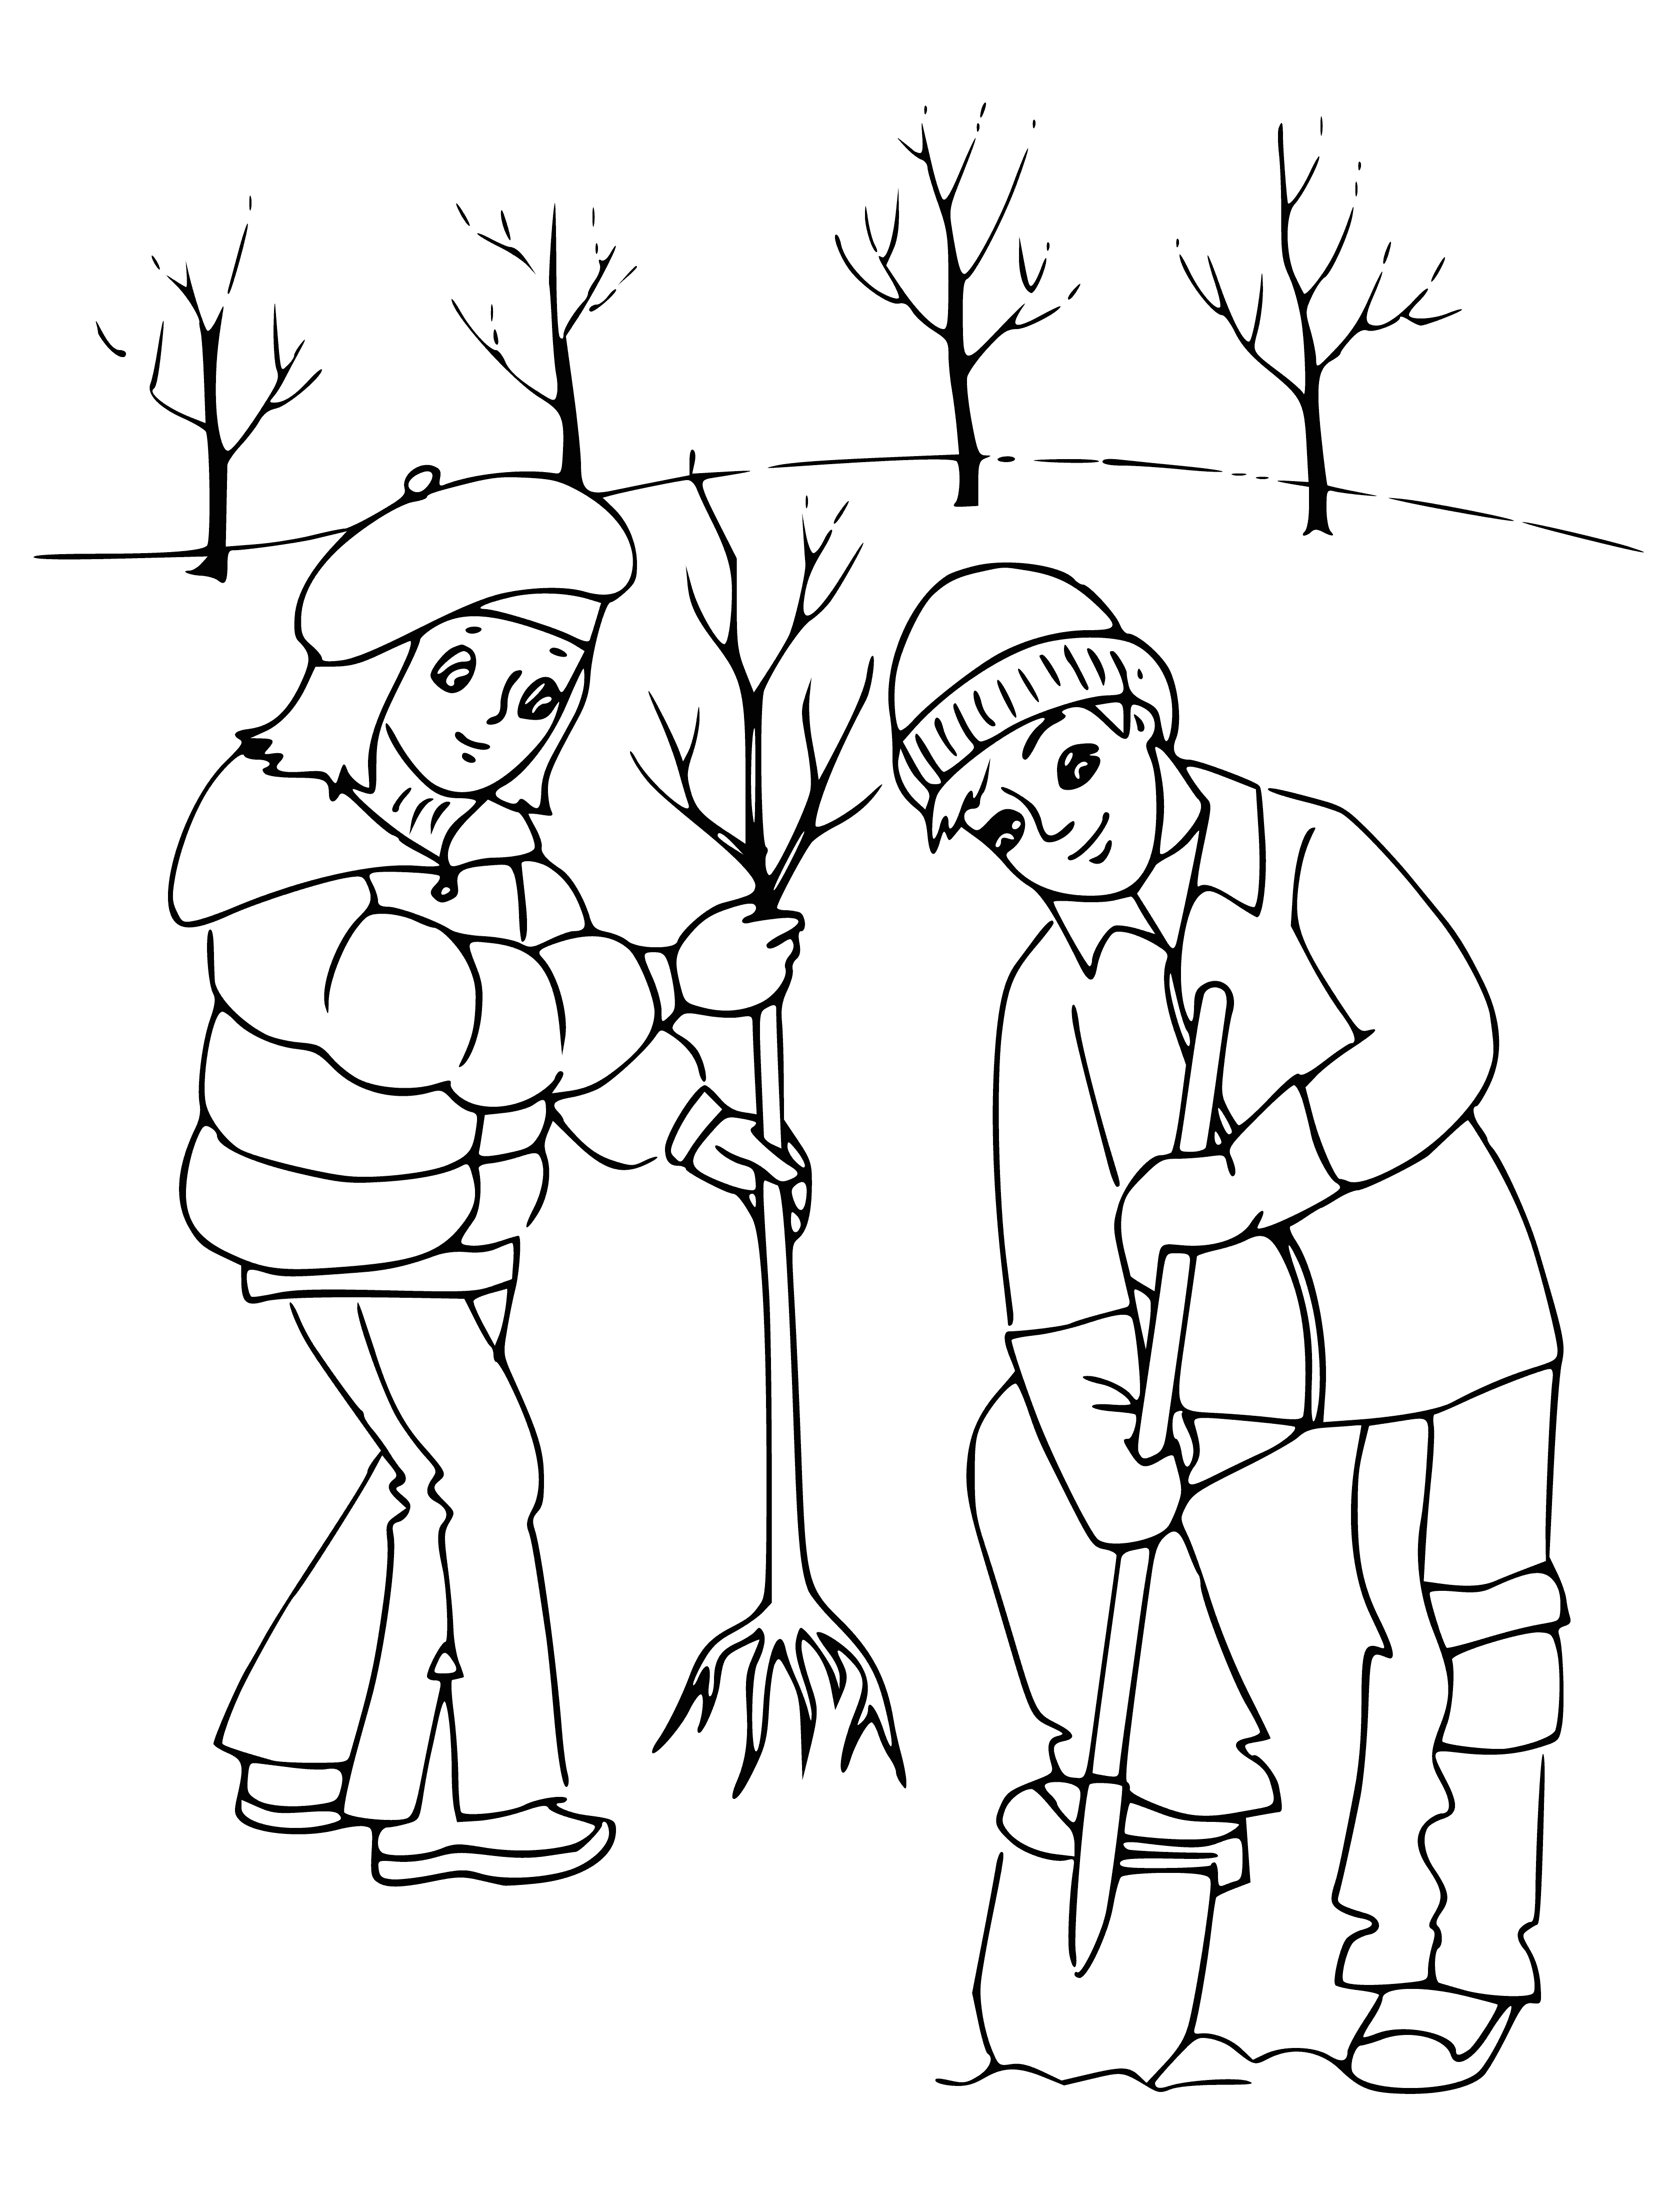 coloring page: Kids plant trees in Spring, dig hole, put tree in, fill w/dirt, water it, & watch it grow! #GreenThumb